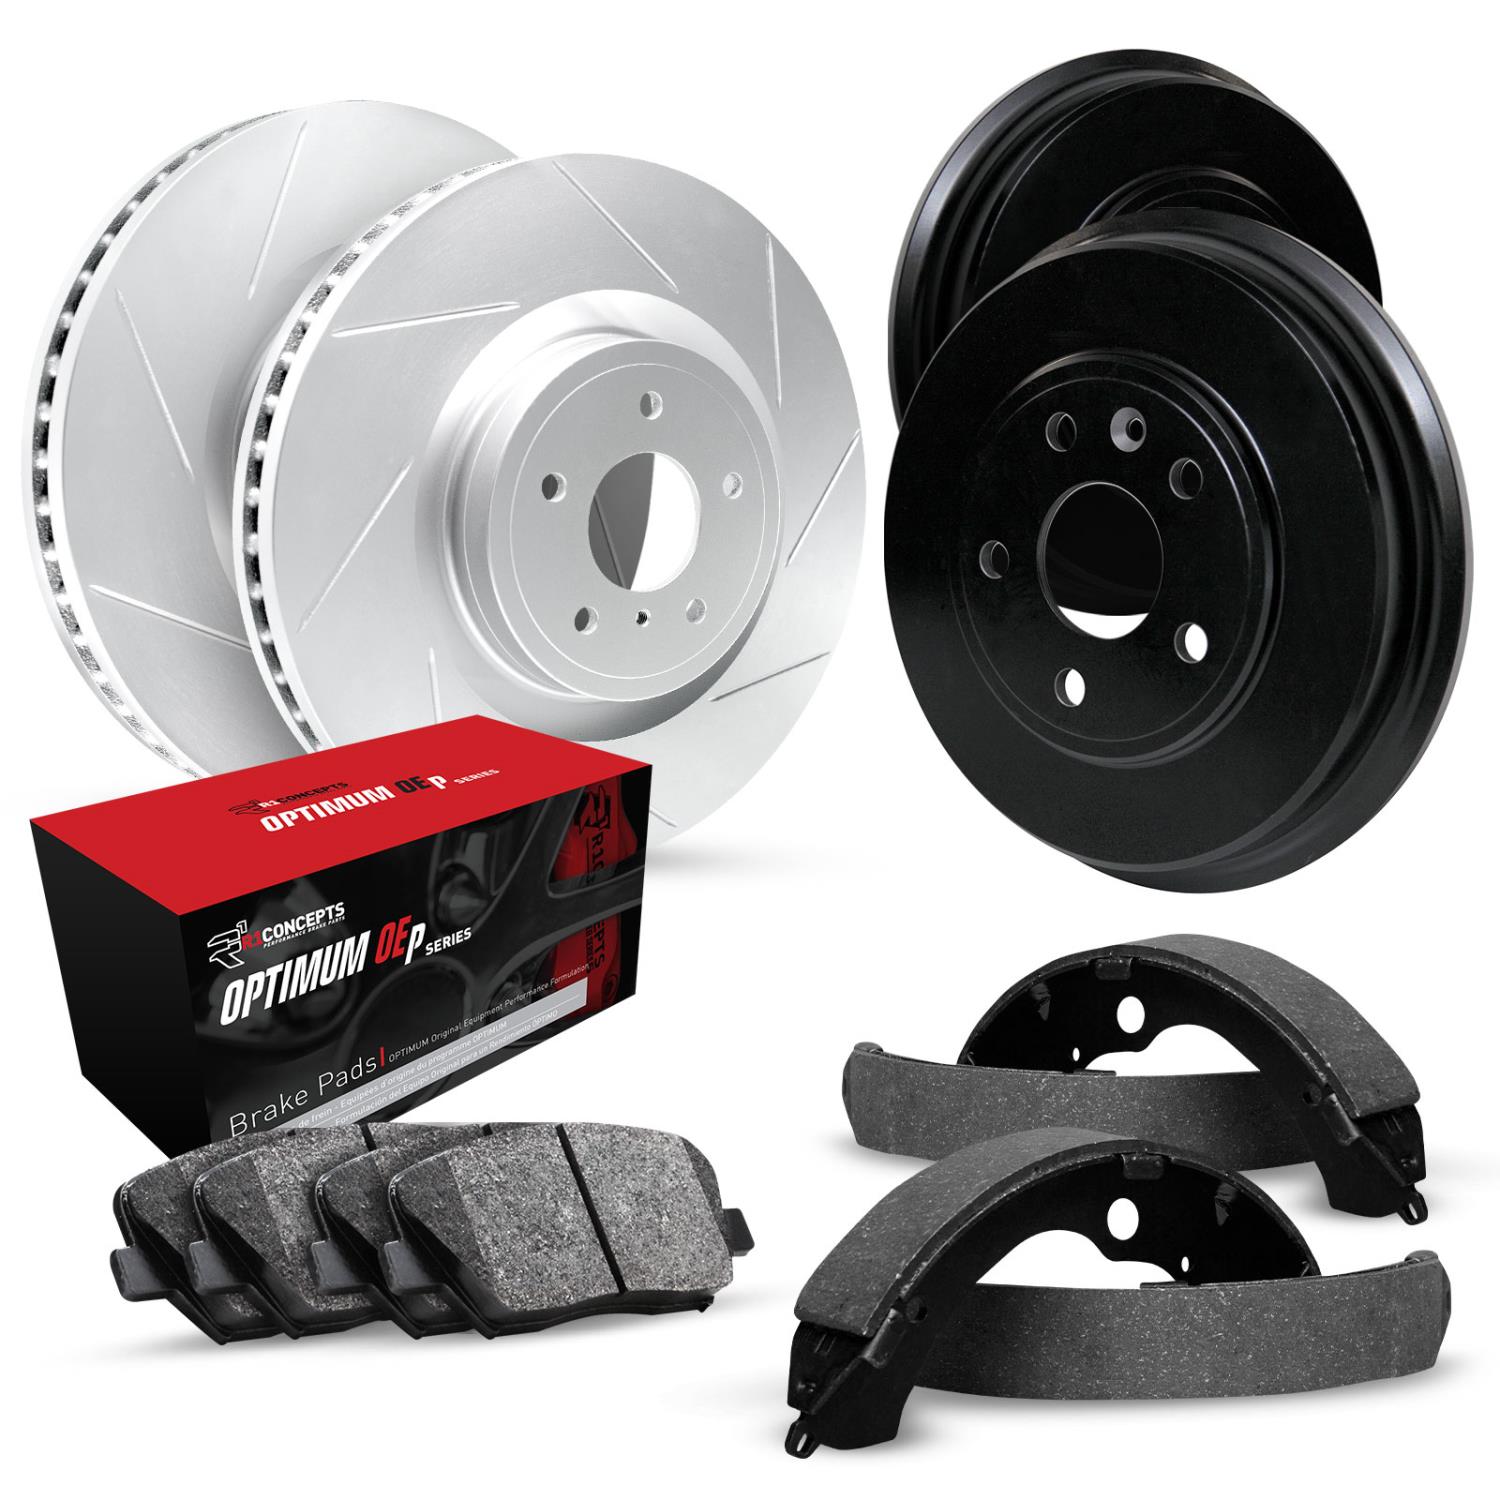 GEO-Carbon Slotted Brake Rotor & Drum Set w/Optimum OE Pads & Shoes, 1967-1970 GM, Position: Front & Rear